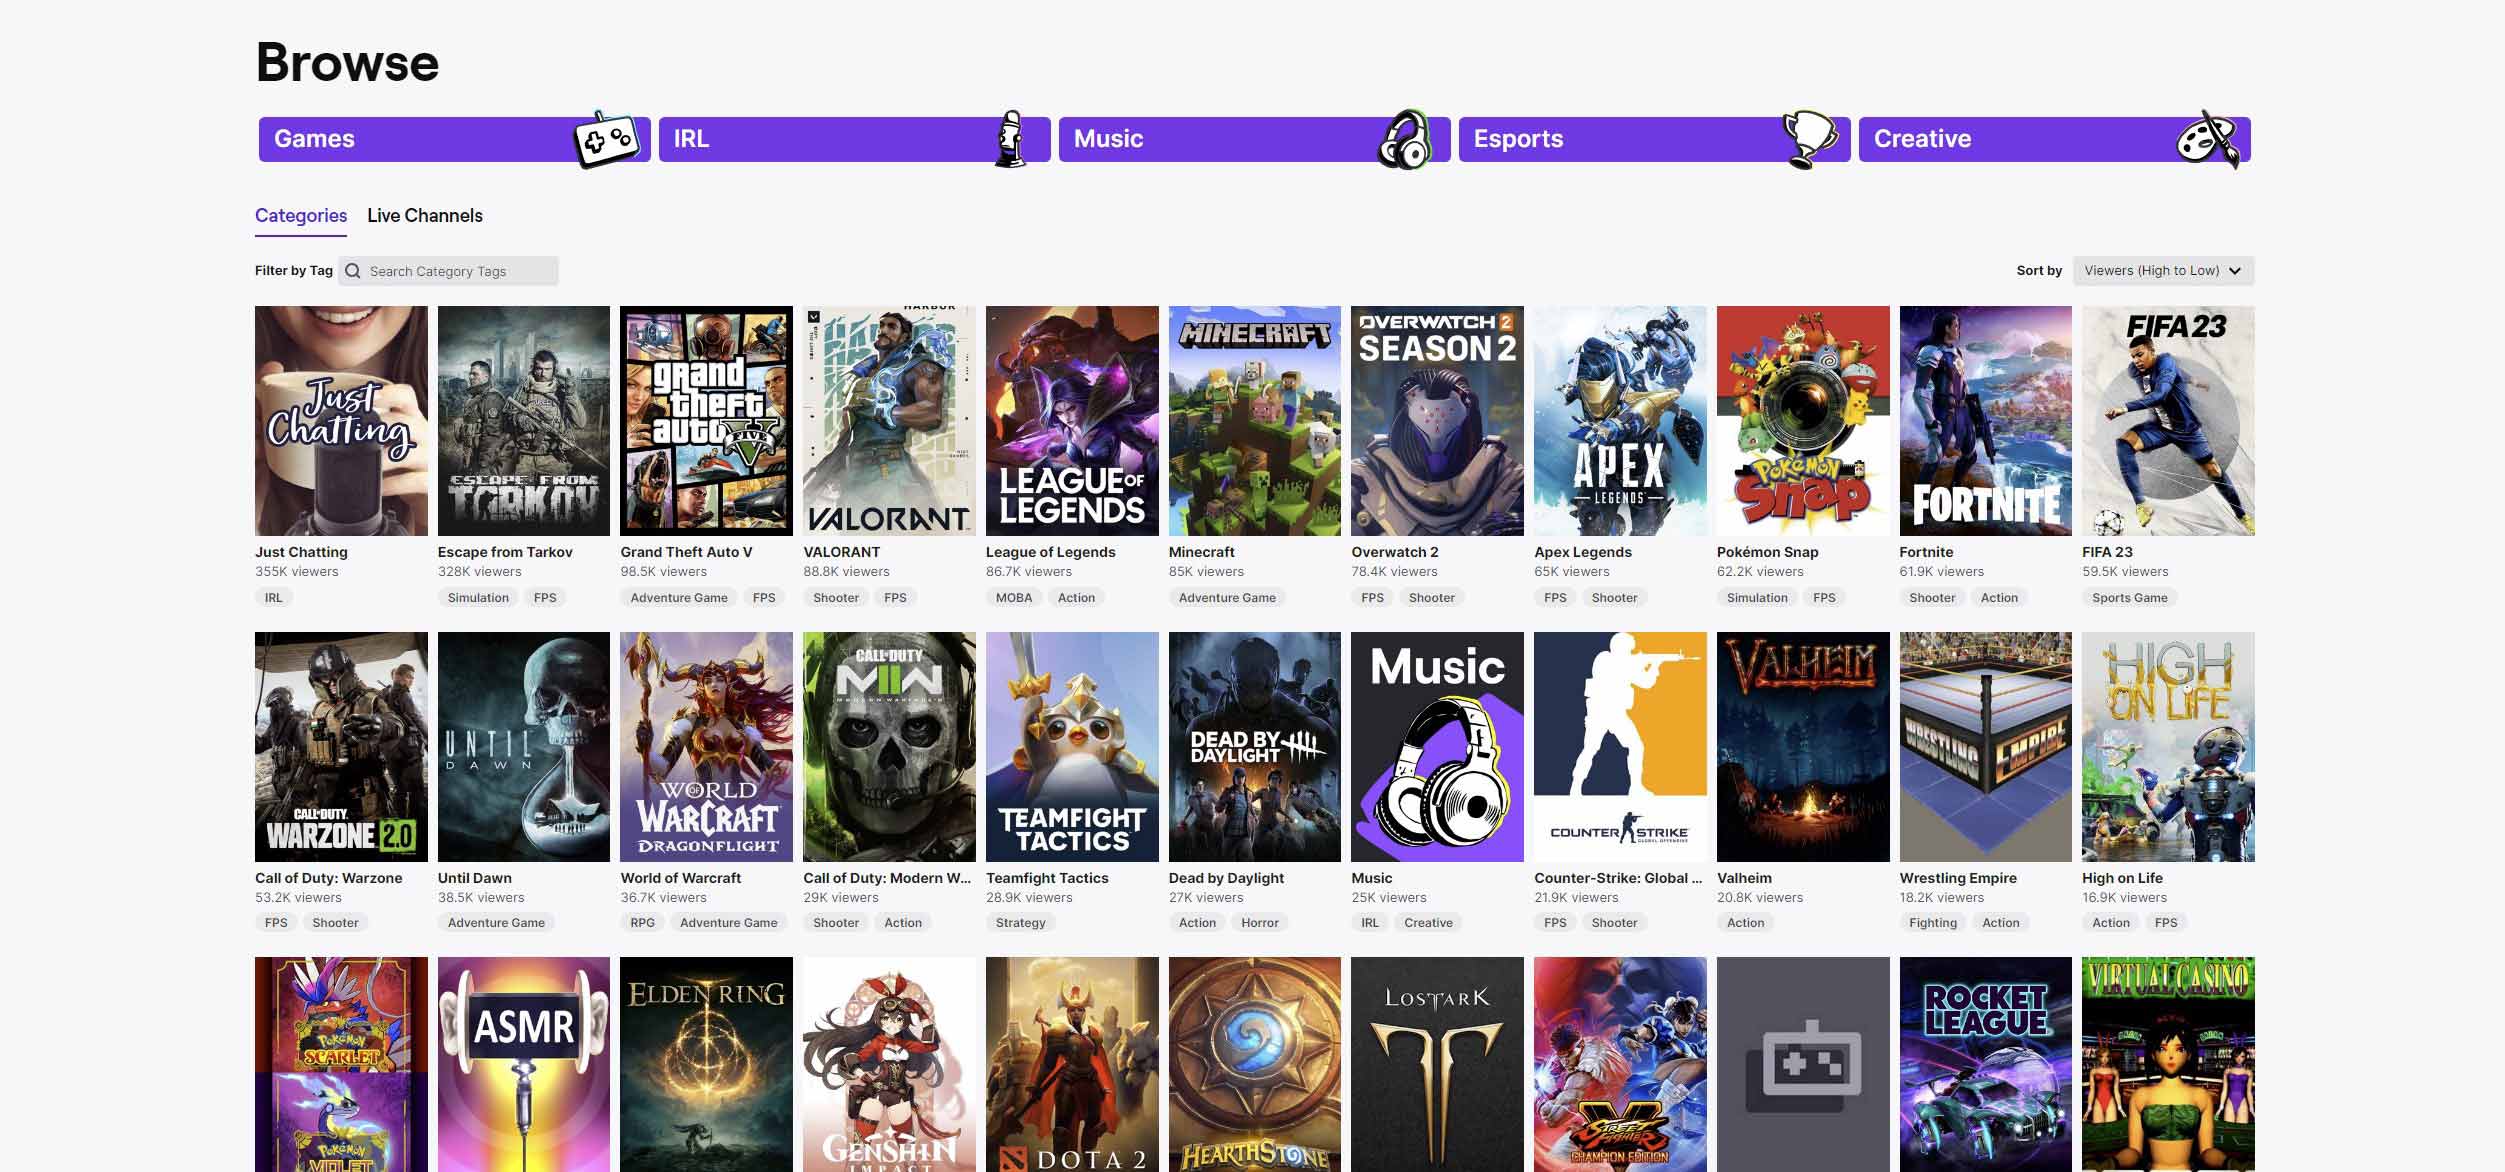 Main browse menu of Twitch